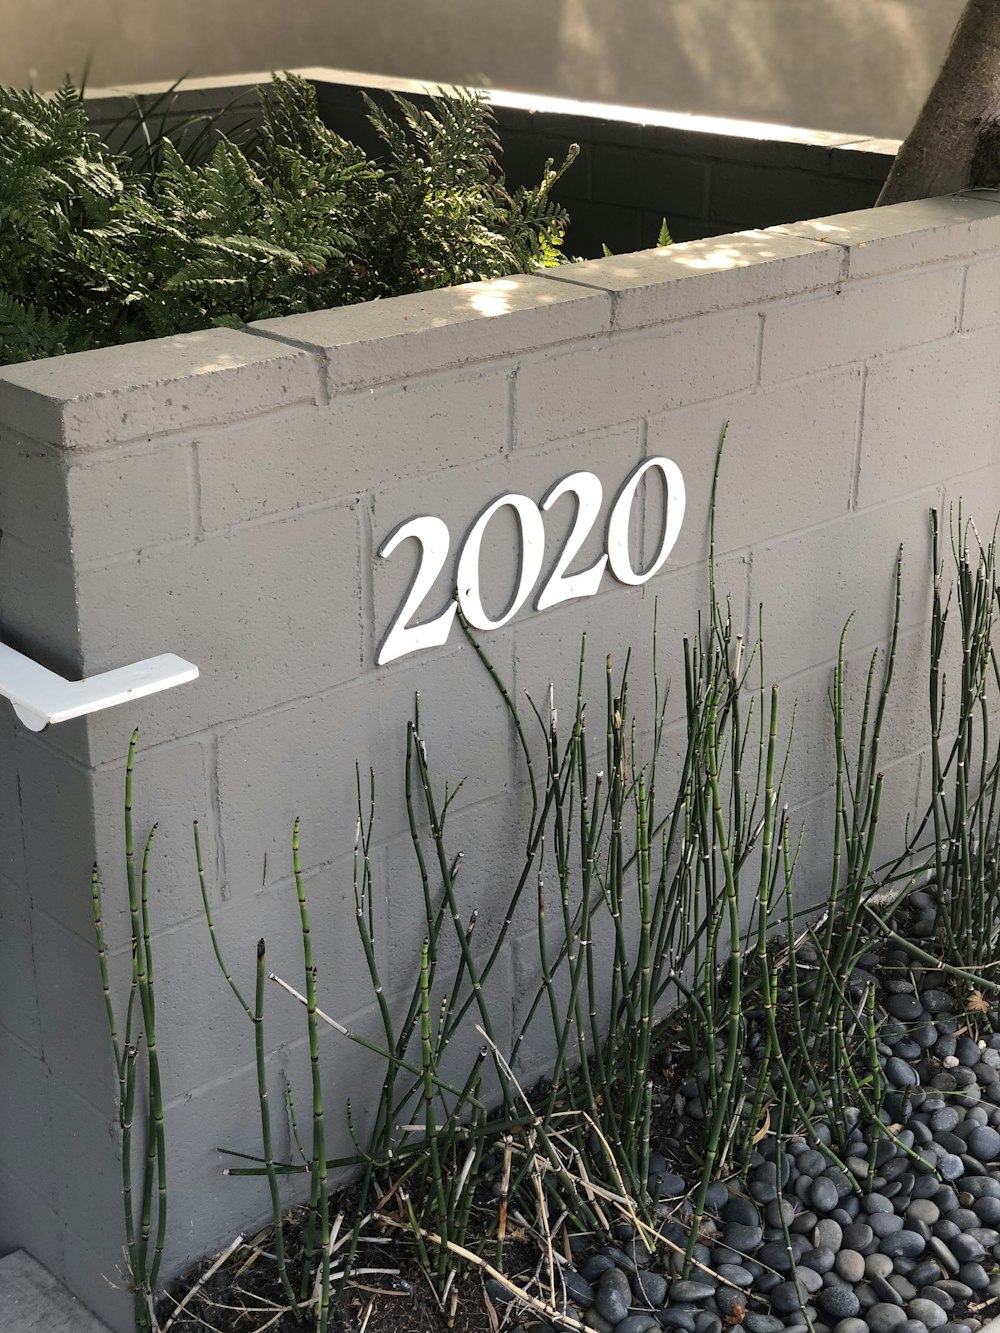 2020 number sign on gray concrete wall